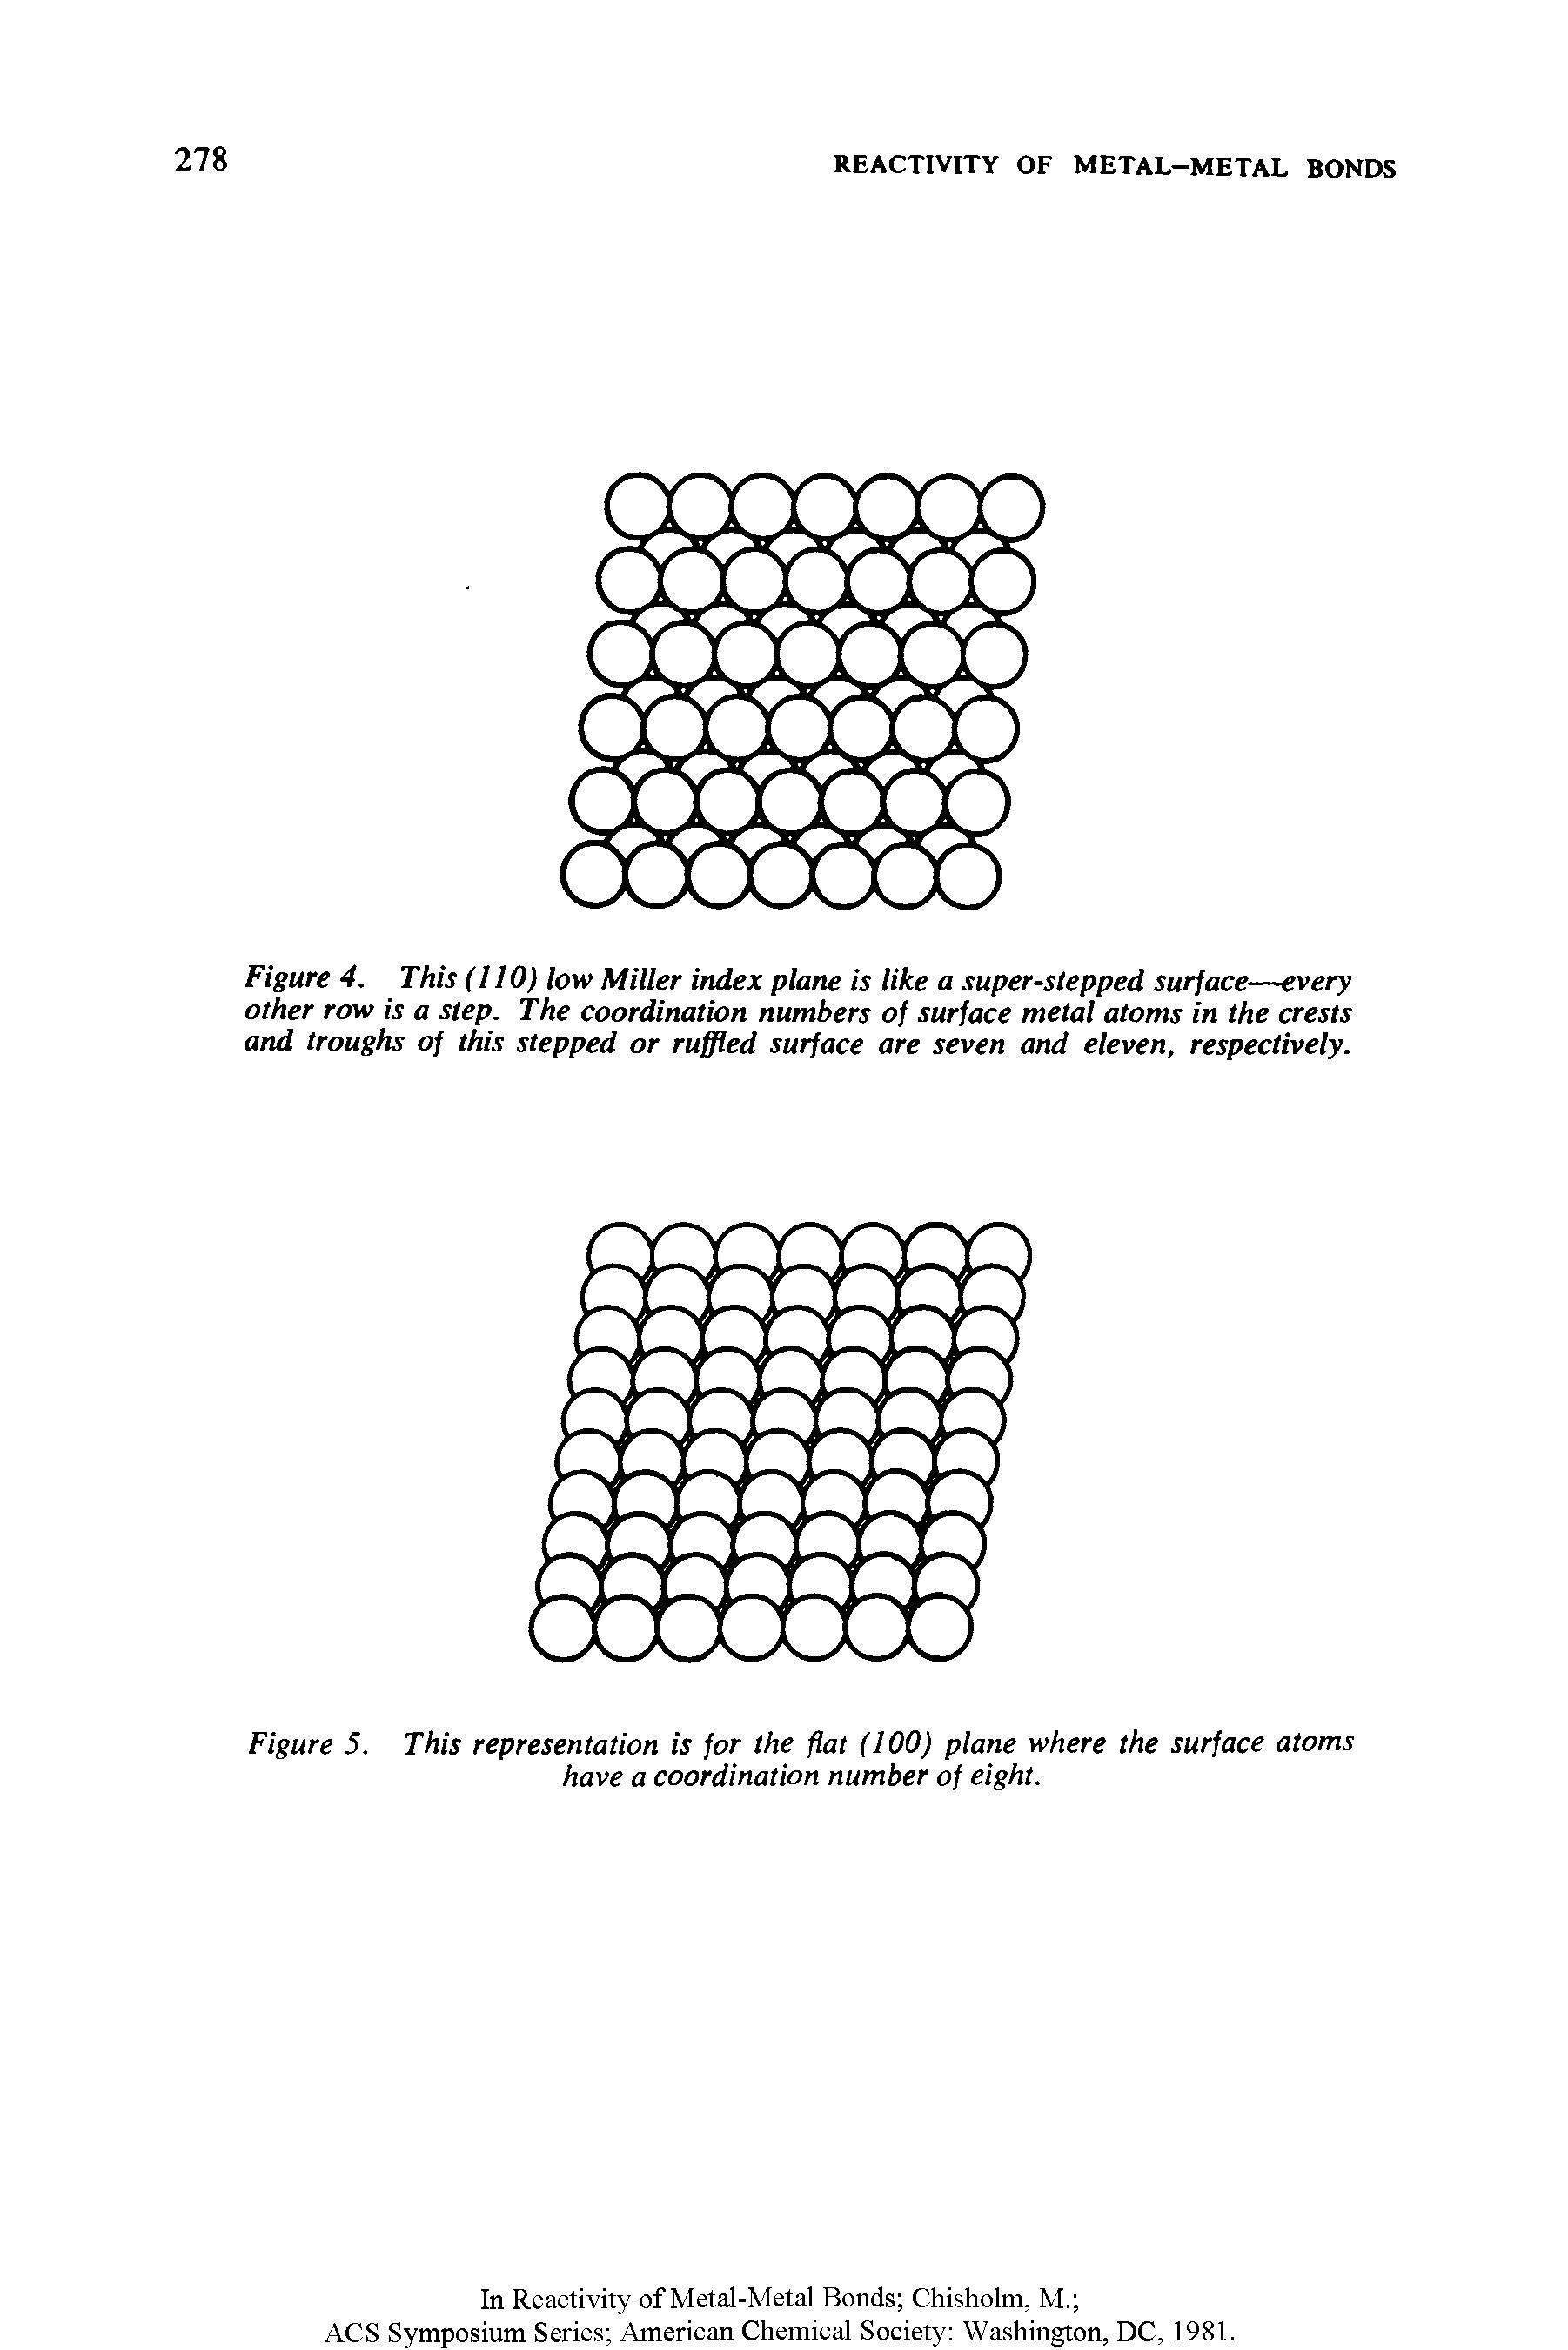 Figure 4. This (110) low Miller index plane is like a super-stepped surface—every other row is a step. The coordination numbers of surface metal atoms in the crests and troughs of this stepped or ruffled surface are seven and eleven, respectively.